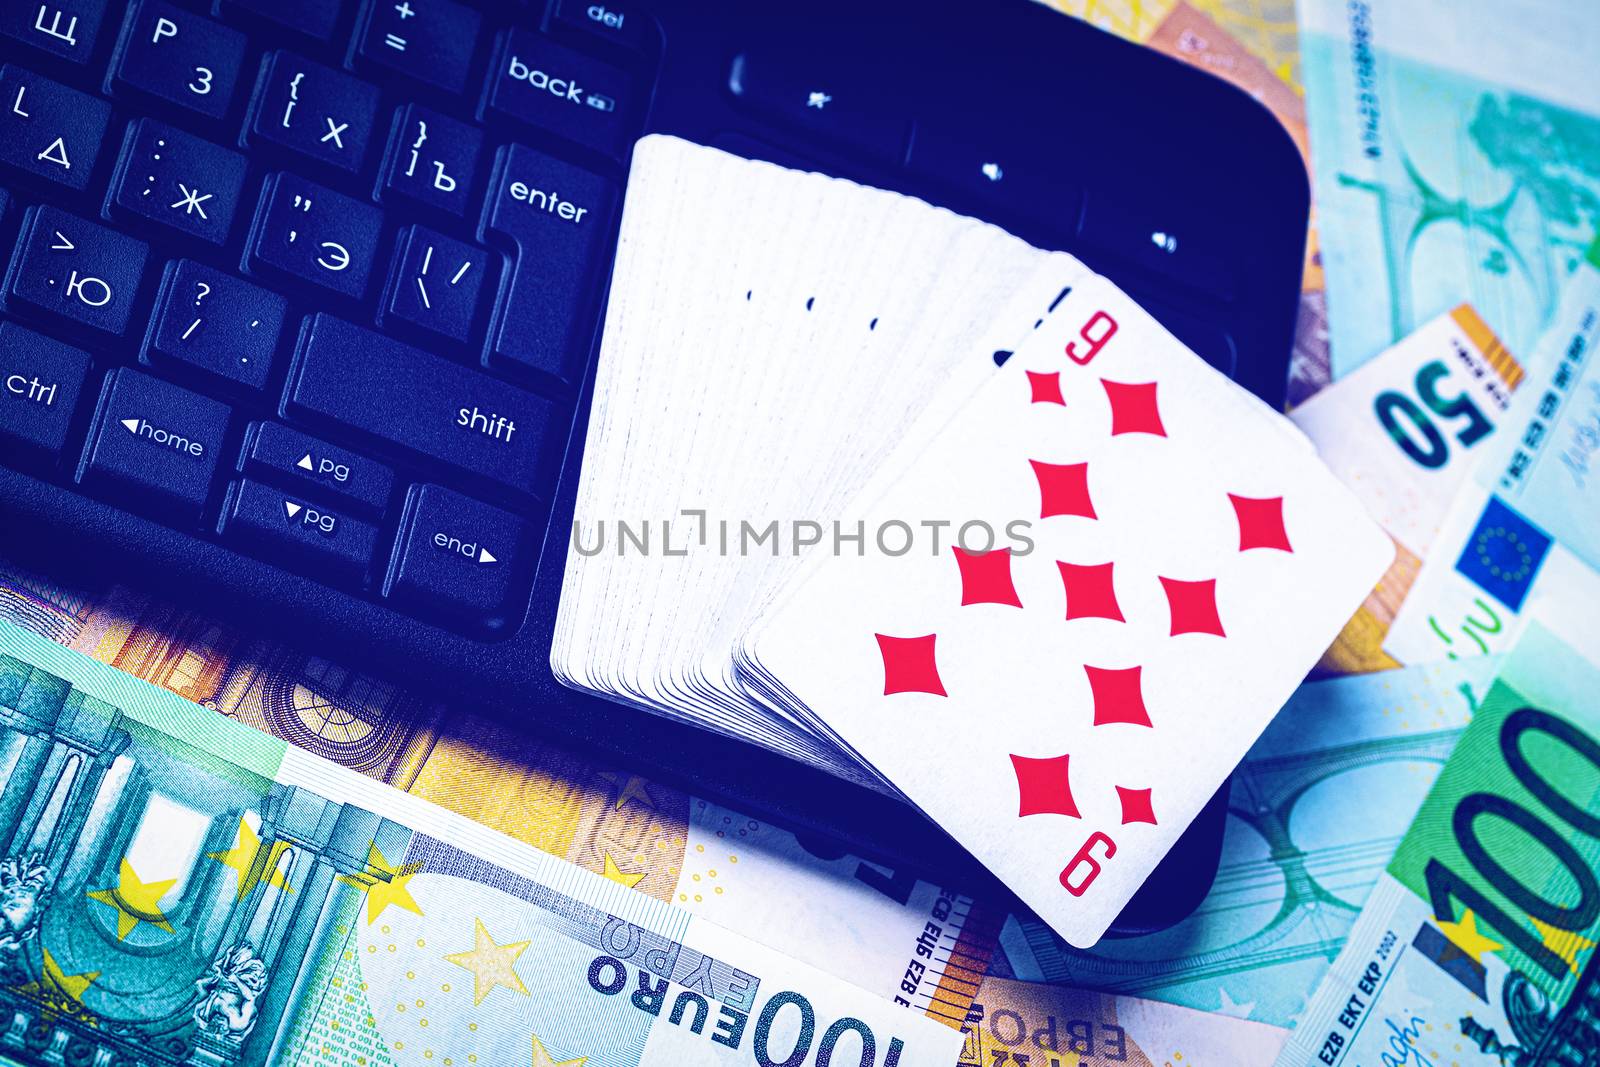 Euro bills, a deck of playing cards and a black keyboard. Concept of card games, casino or poker online. Online gambling.